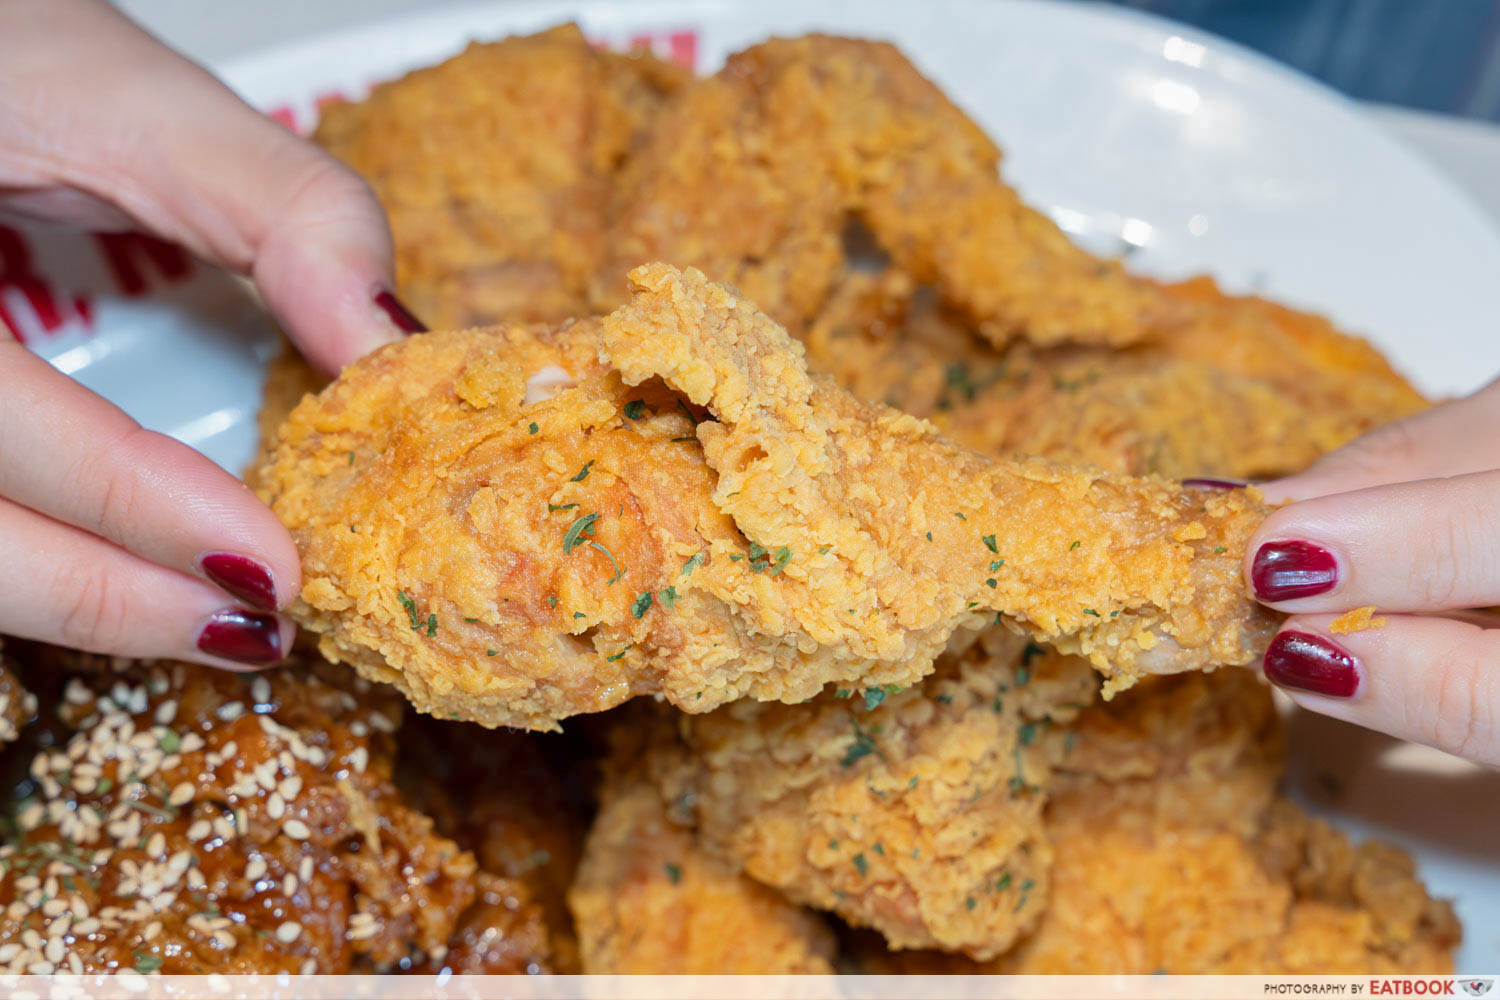 daily-beer-singapore-korean-fried-chicken